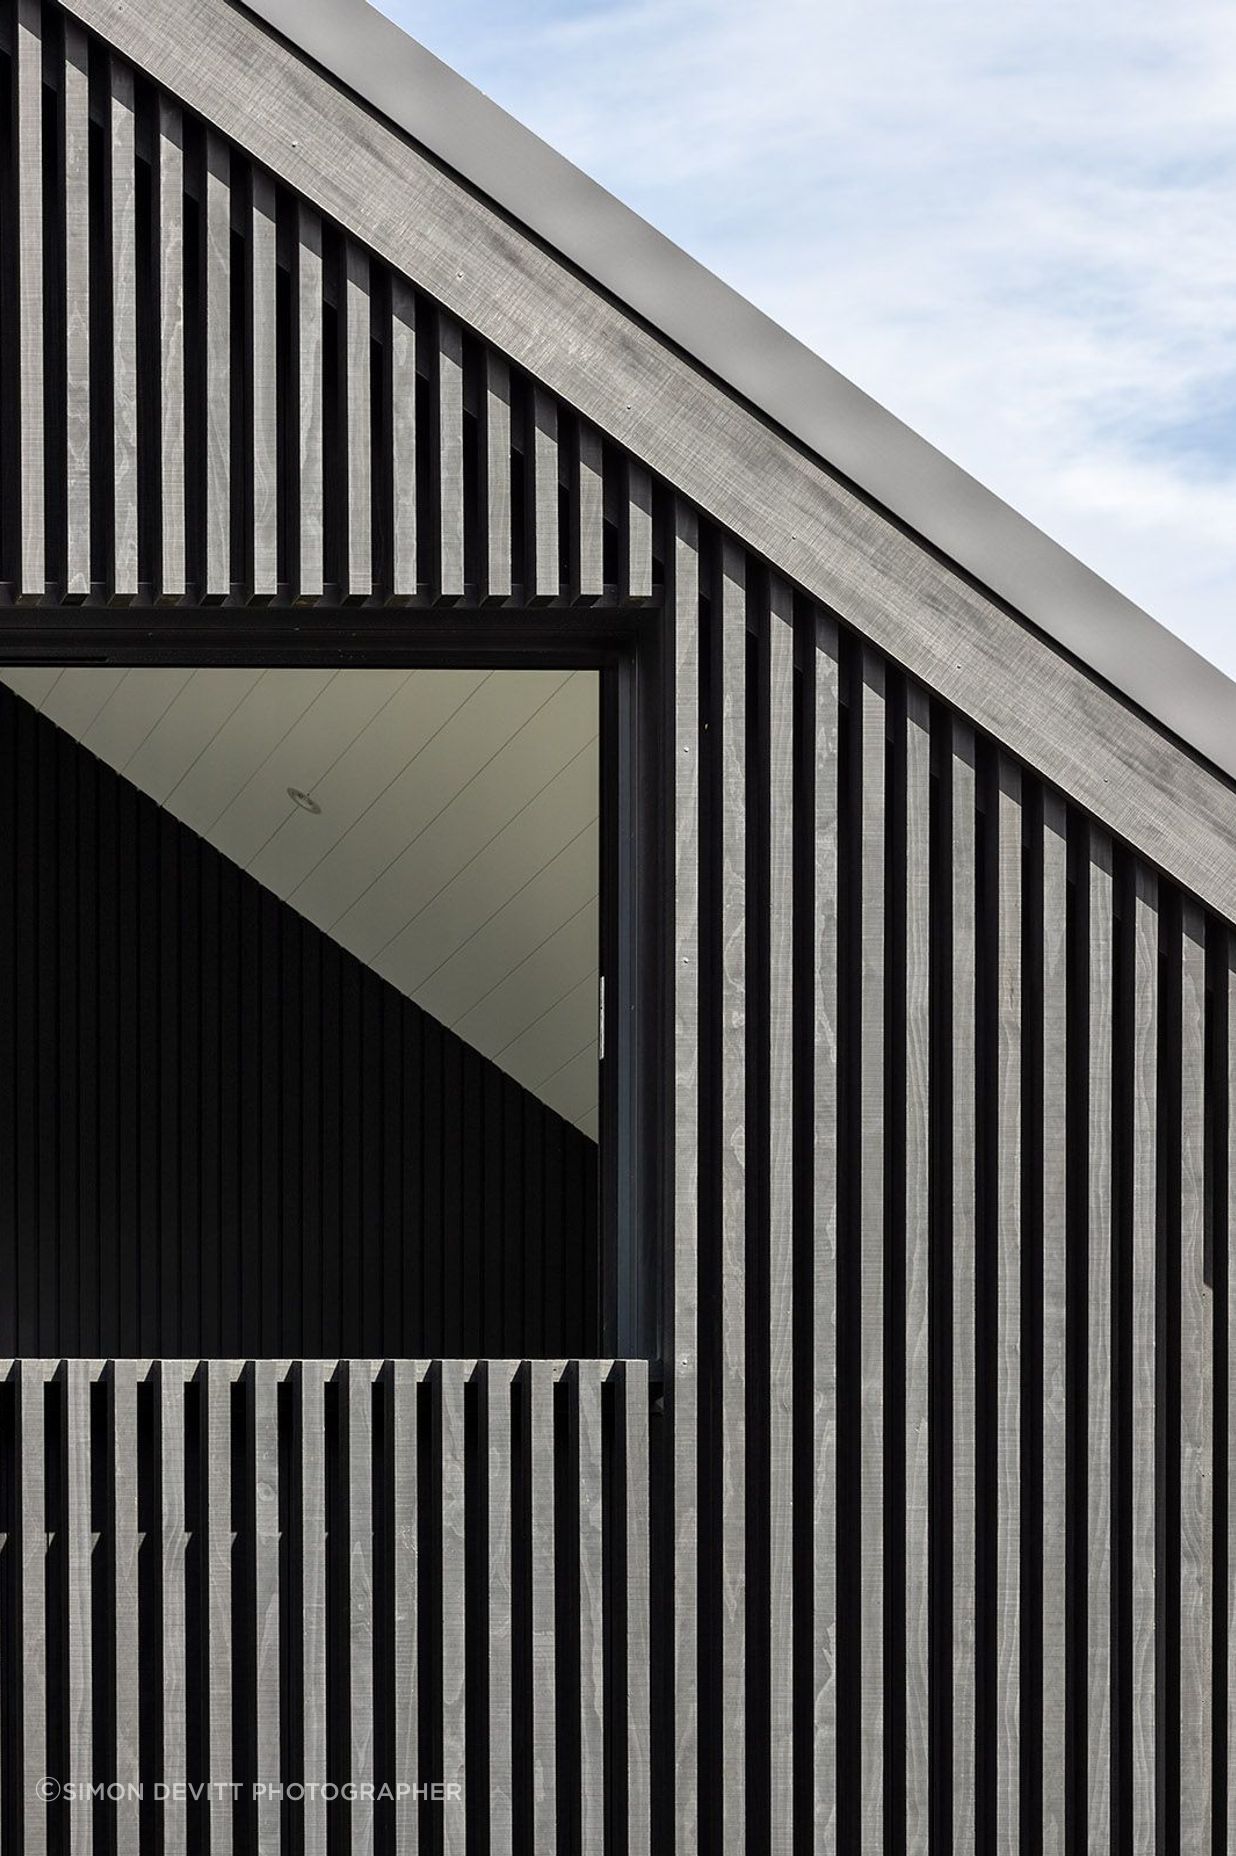 The linear materiality provides a striking geometry.